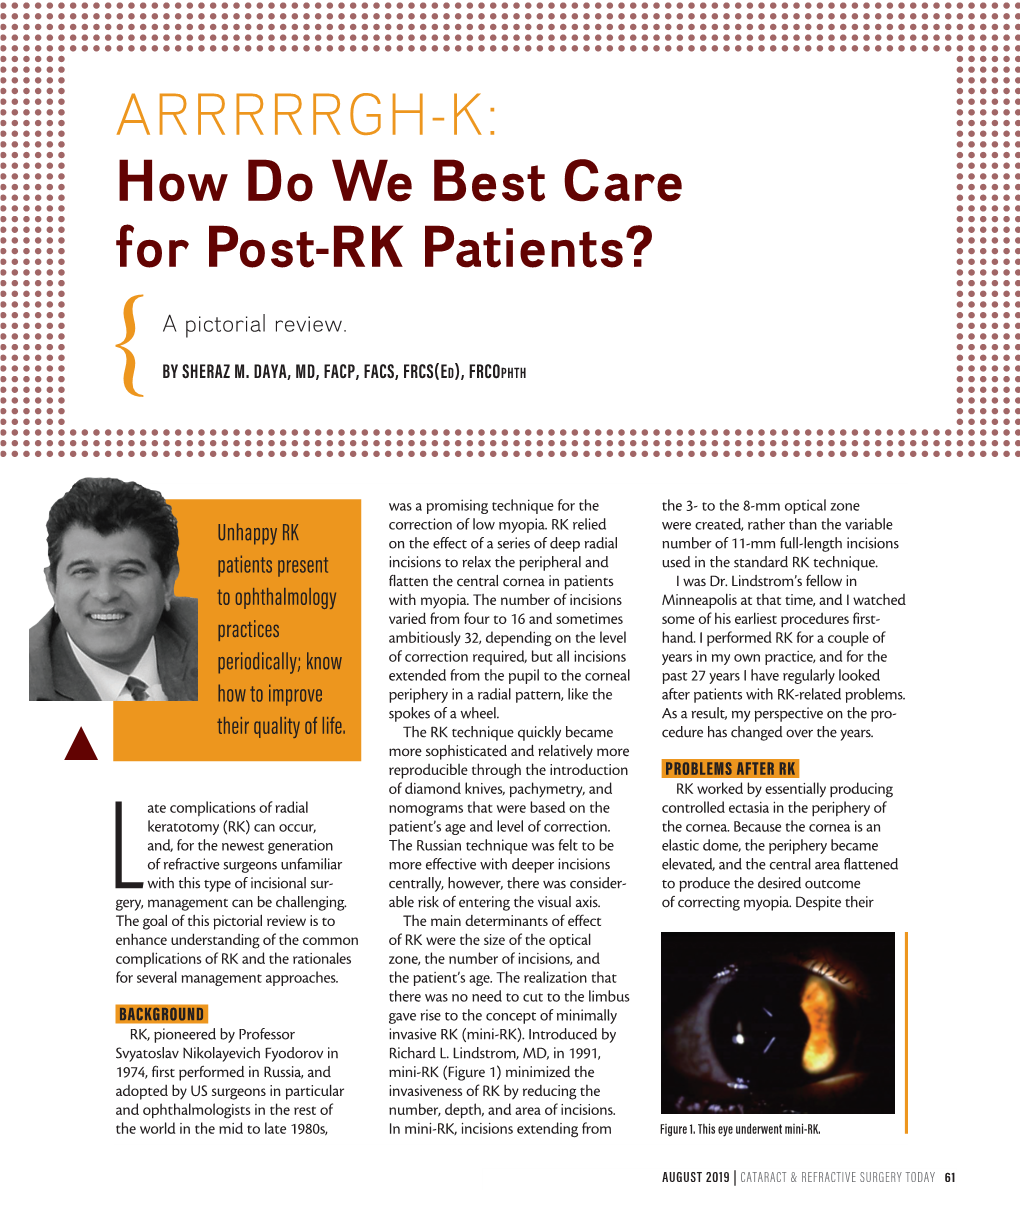 How Do We Best Care for Post-RK Patients?